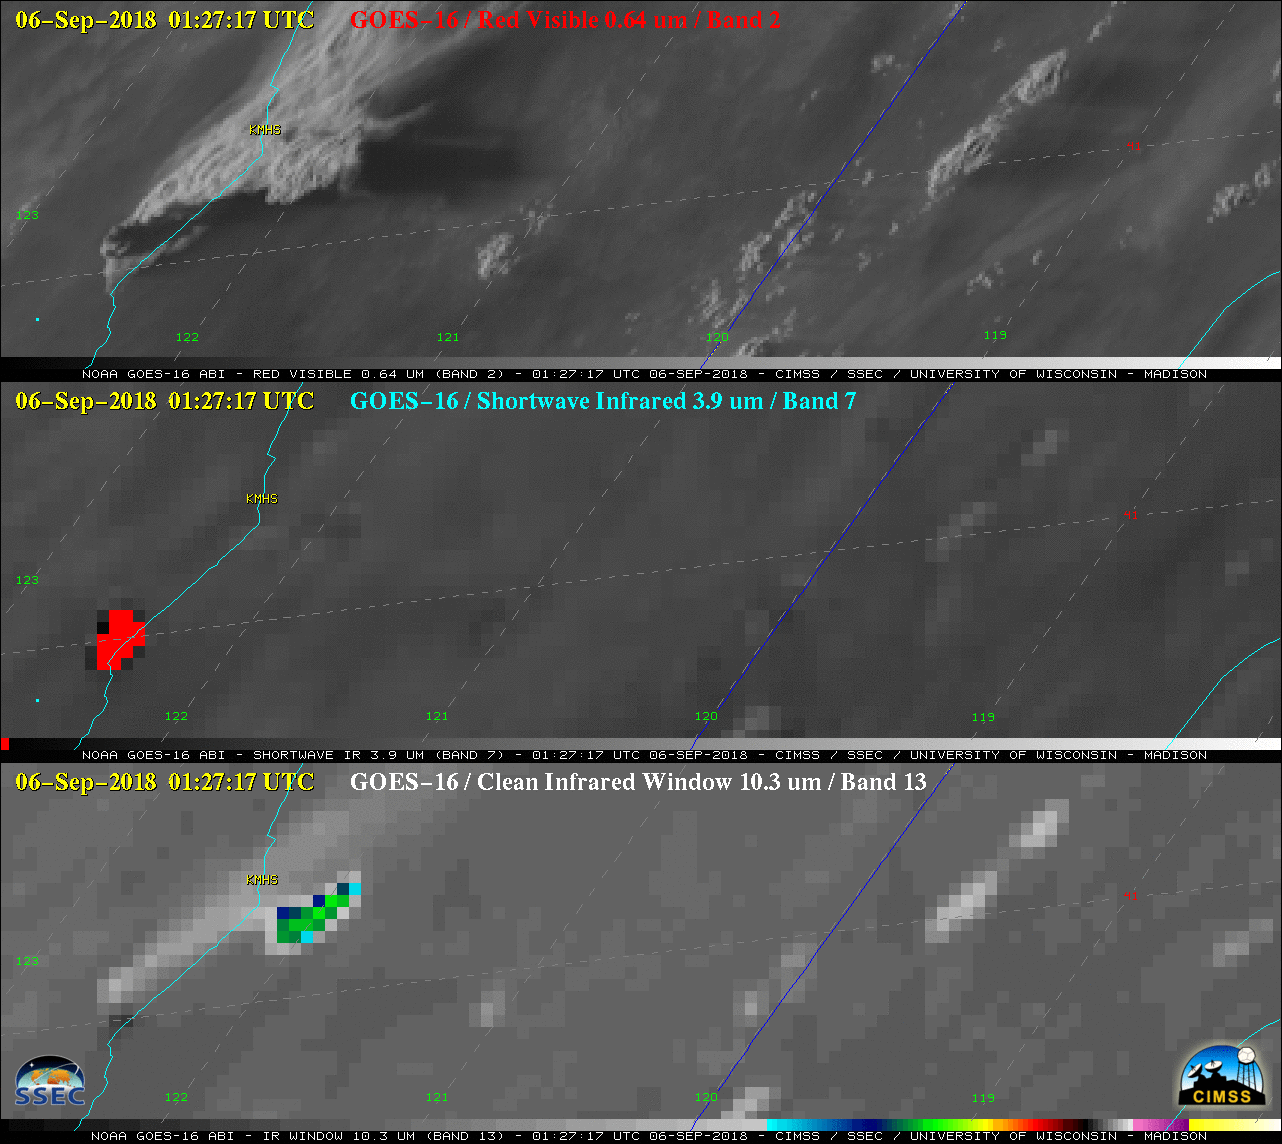 GOES-16 "Red" Visible (0.64 µm, top), Shortwave Infrared (3.9 µm, middle), "Clean" Infrared Window (10.3 µm, bottom); Interstate 5 is plotted in cyan [click to play animation | MP4]